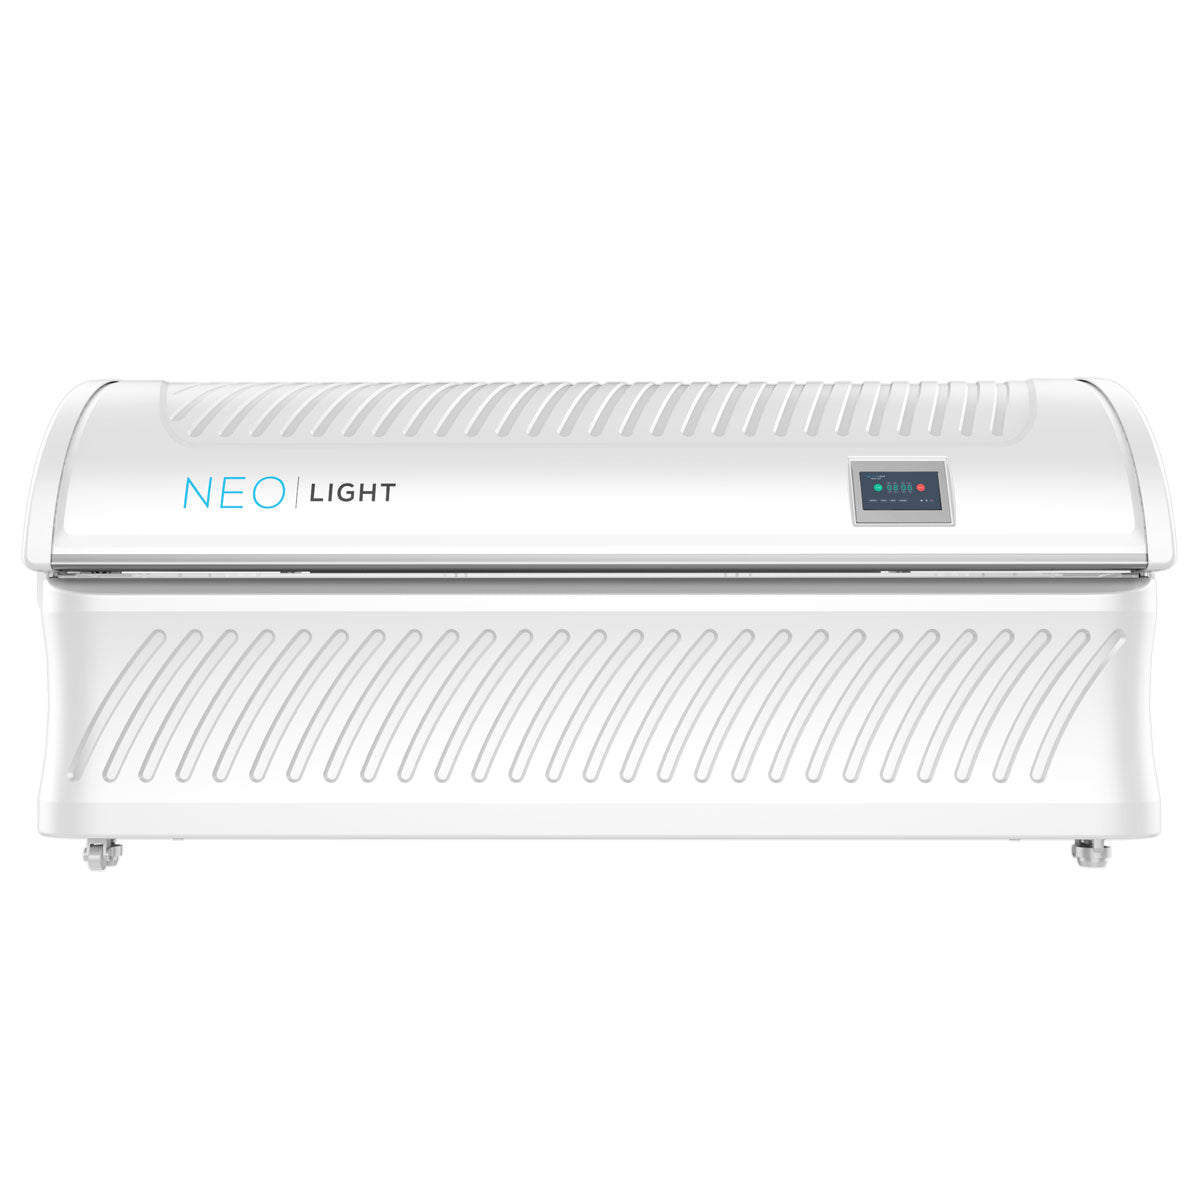 Neo | Light PBM Red light Therapy Bed - 8 Minute Rejuvenation